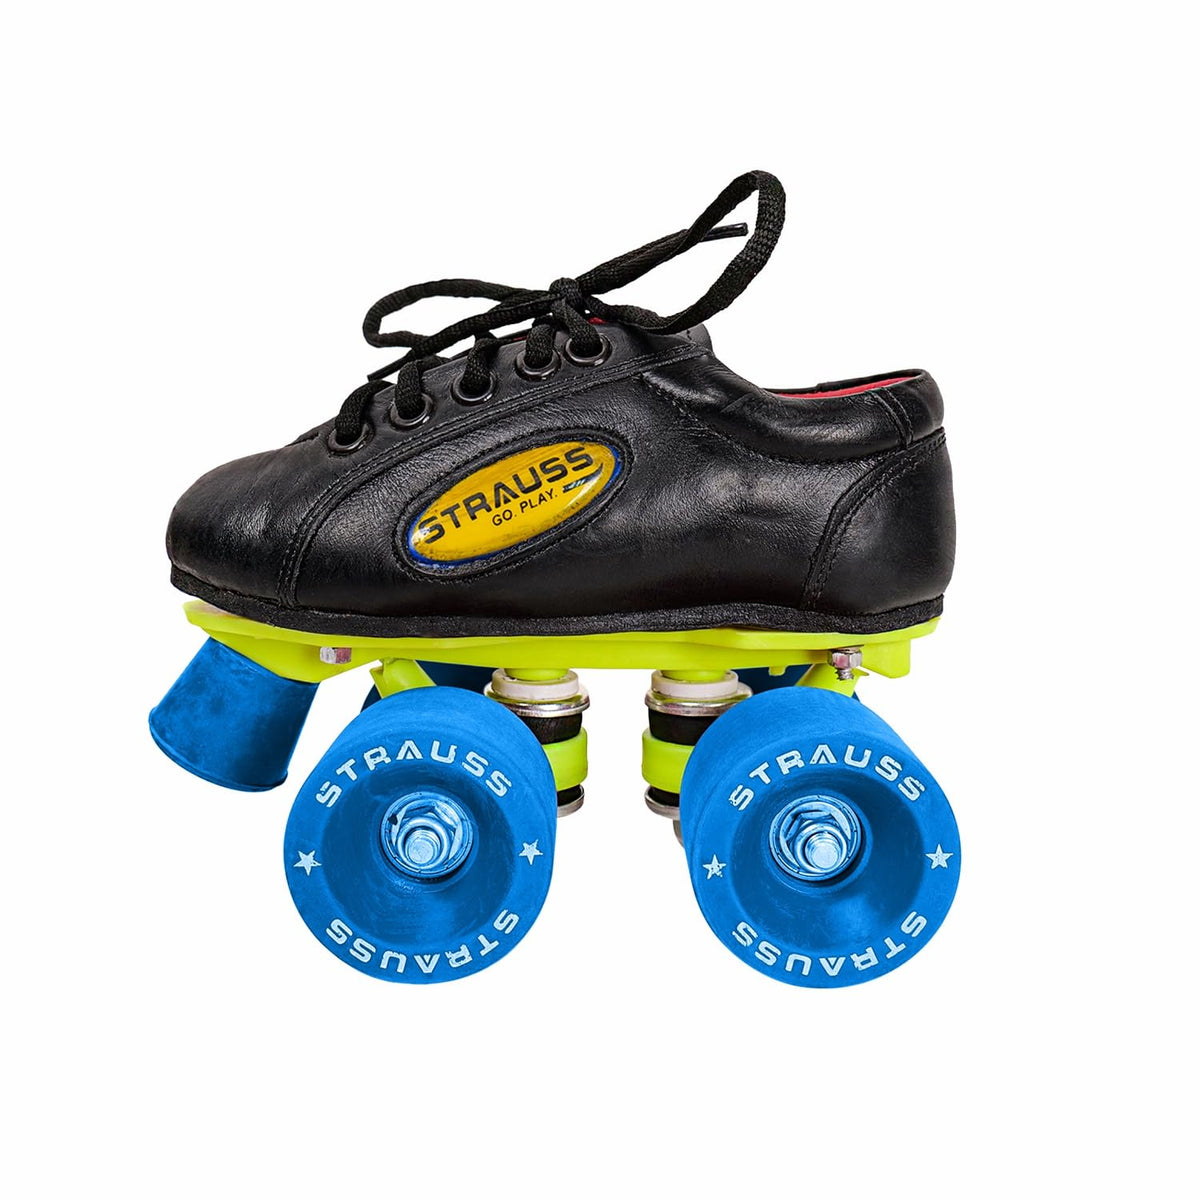 StraussShoe Skate with Rubber Wheel, Gripper, Size- 4, Blue/Black (YS008)